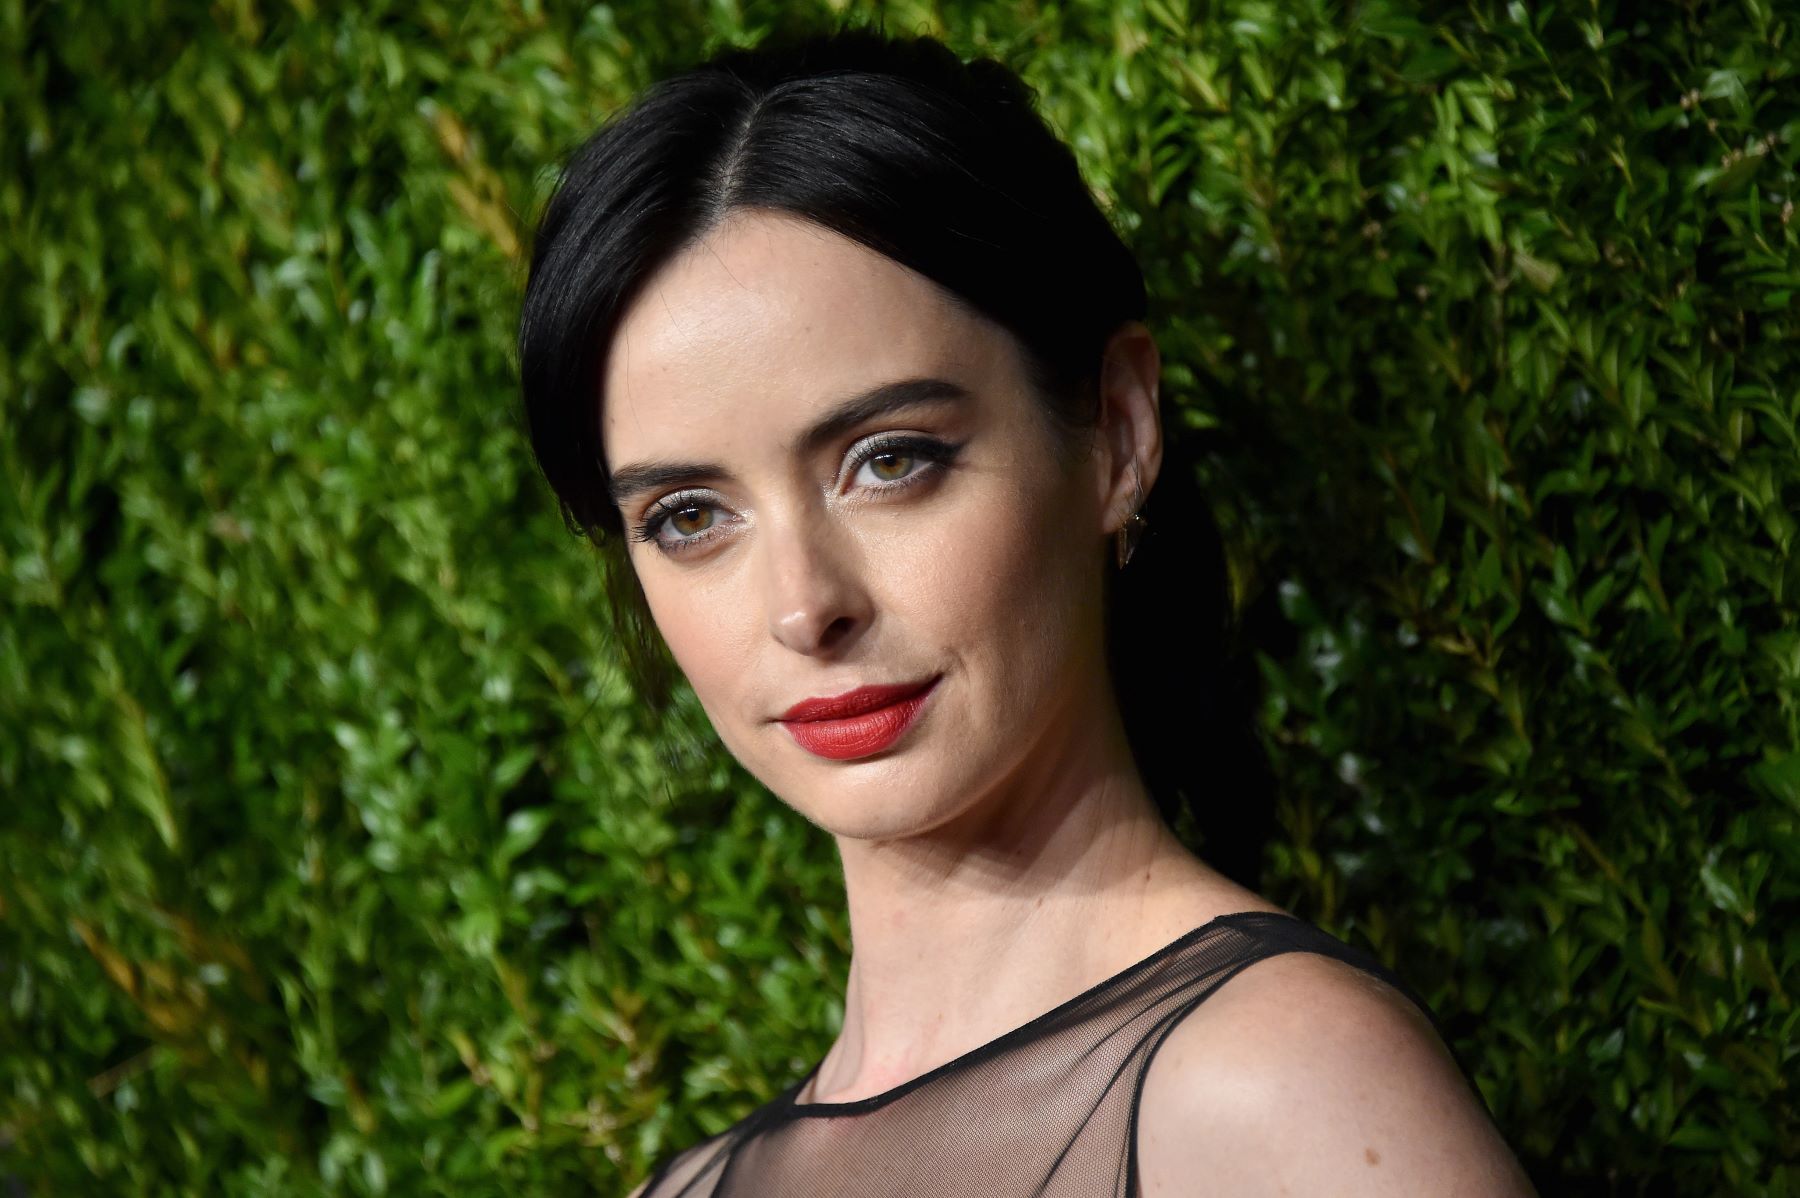 Krysten Ritter, 'Jessica Jones' star, sports red lips and a ponytail at an awards show.